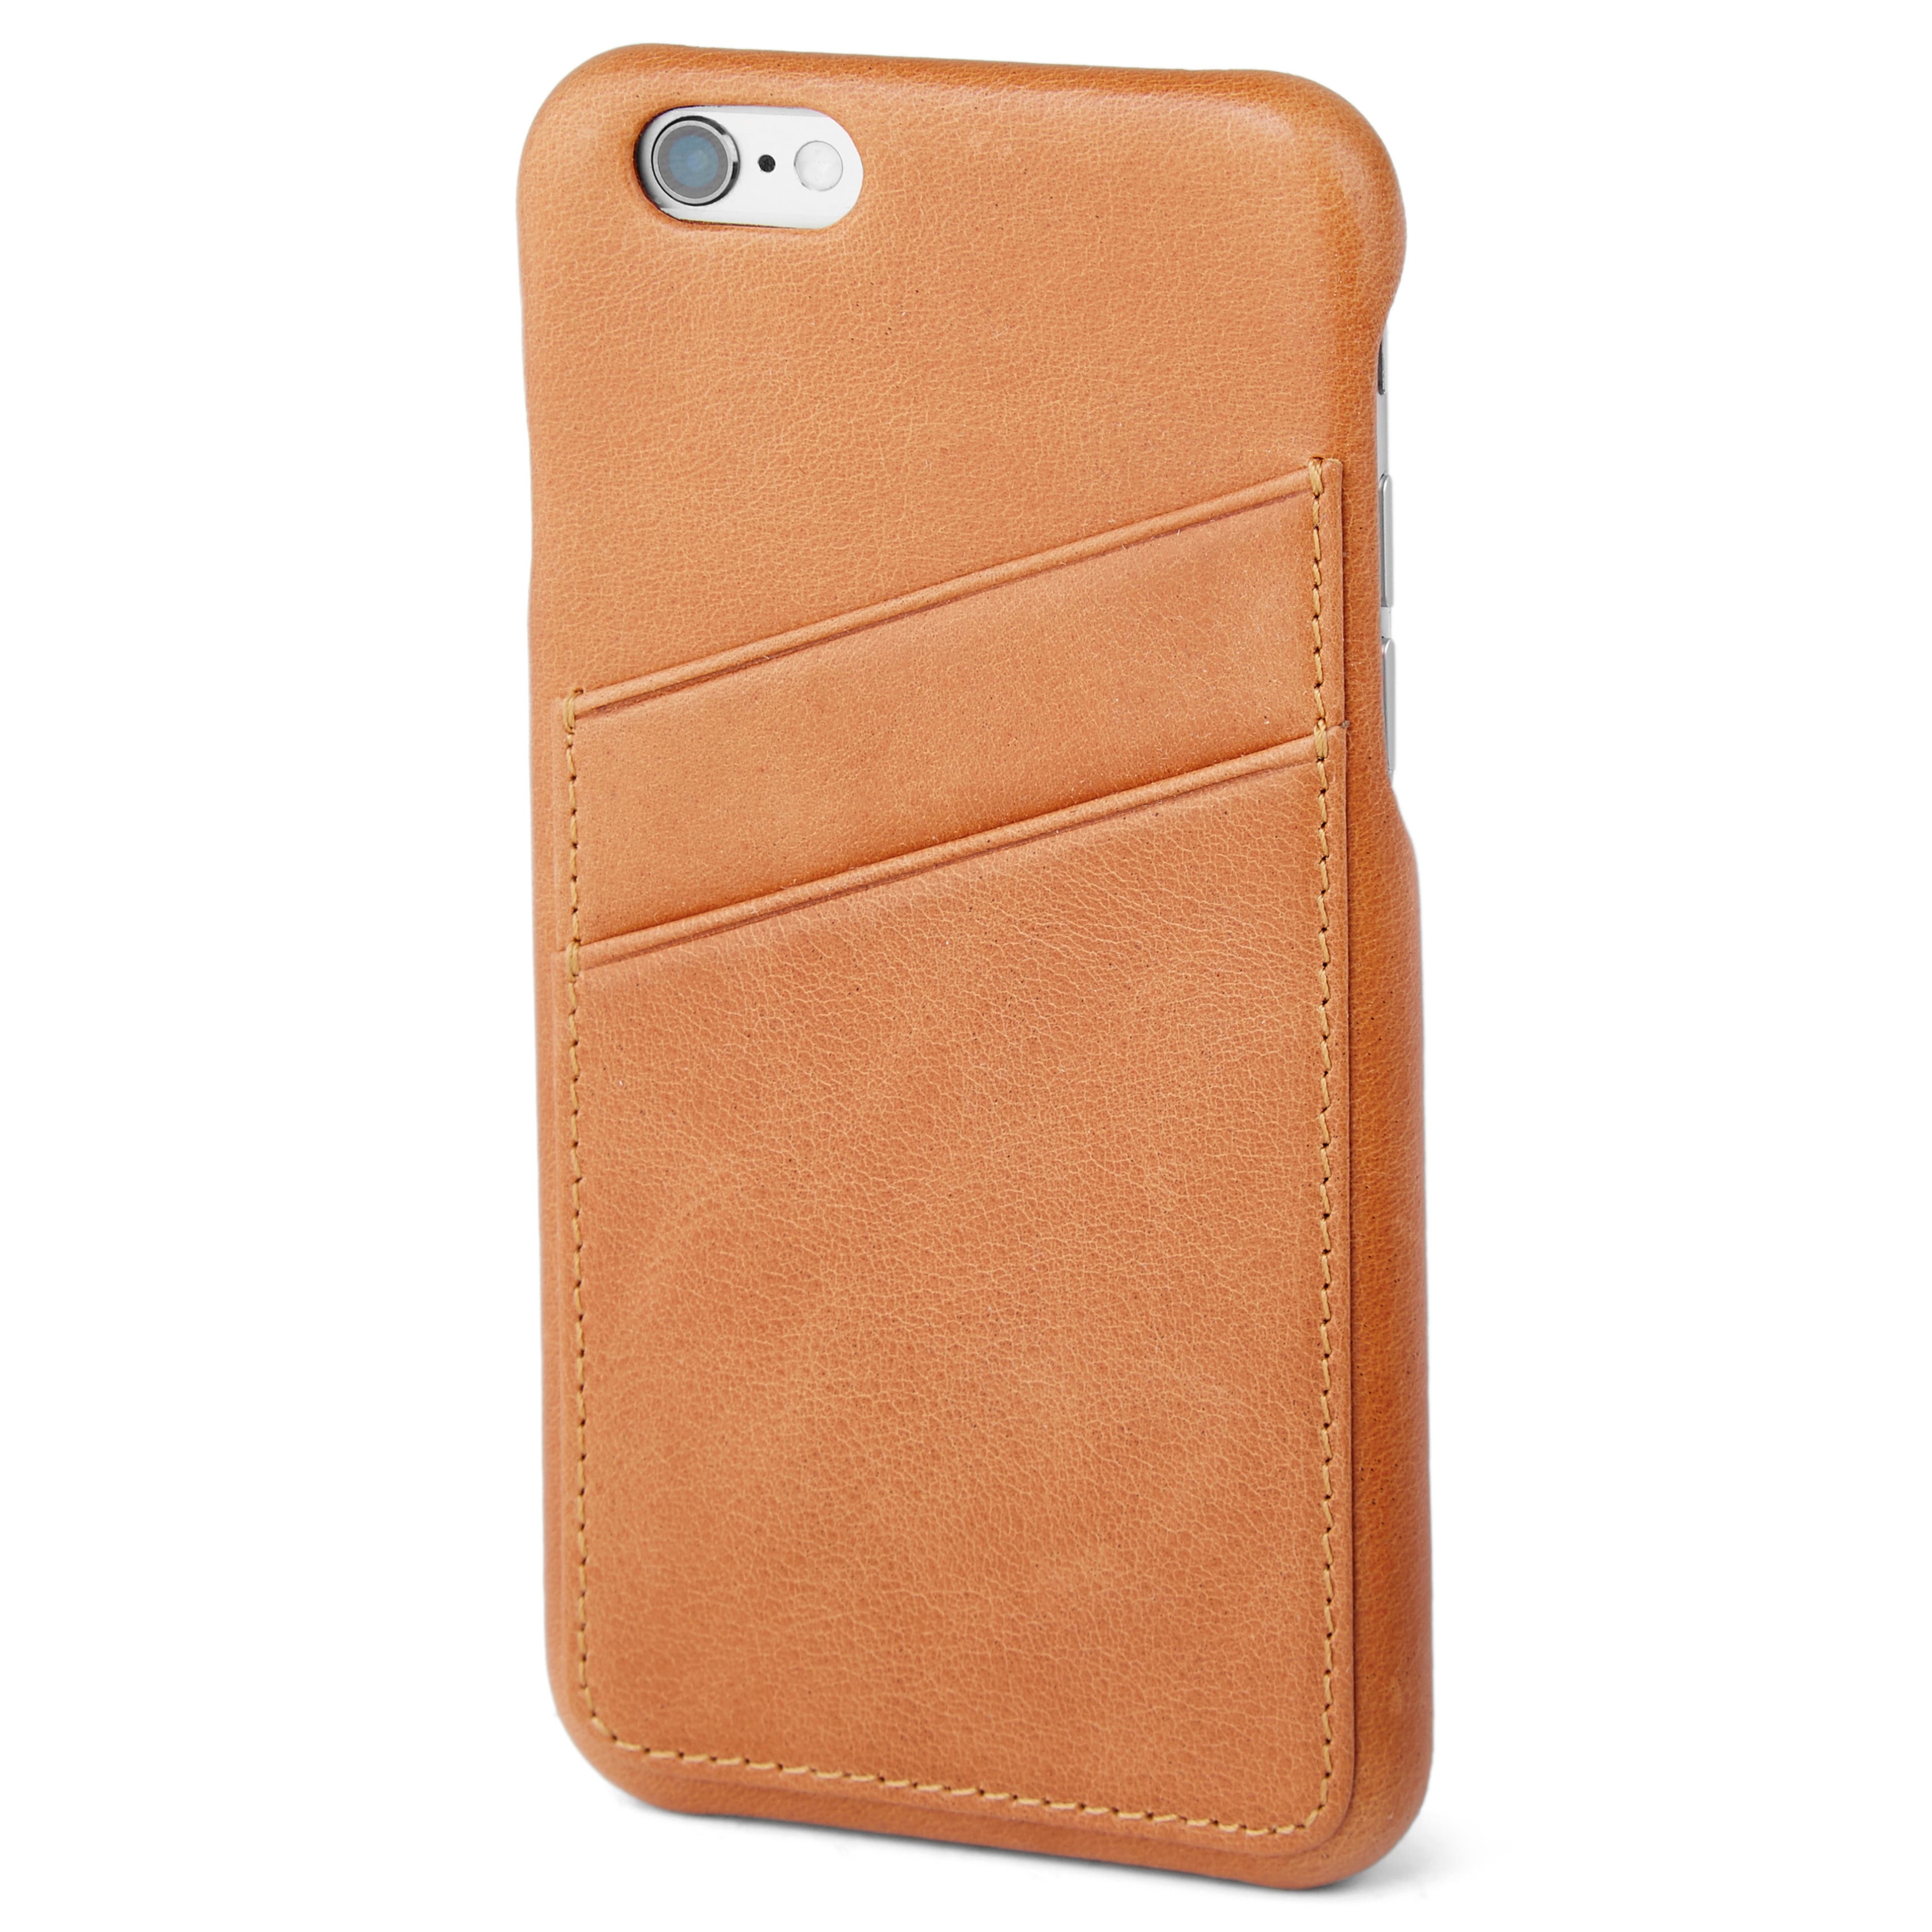 iPhone 6 Light Brown Leather Case